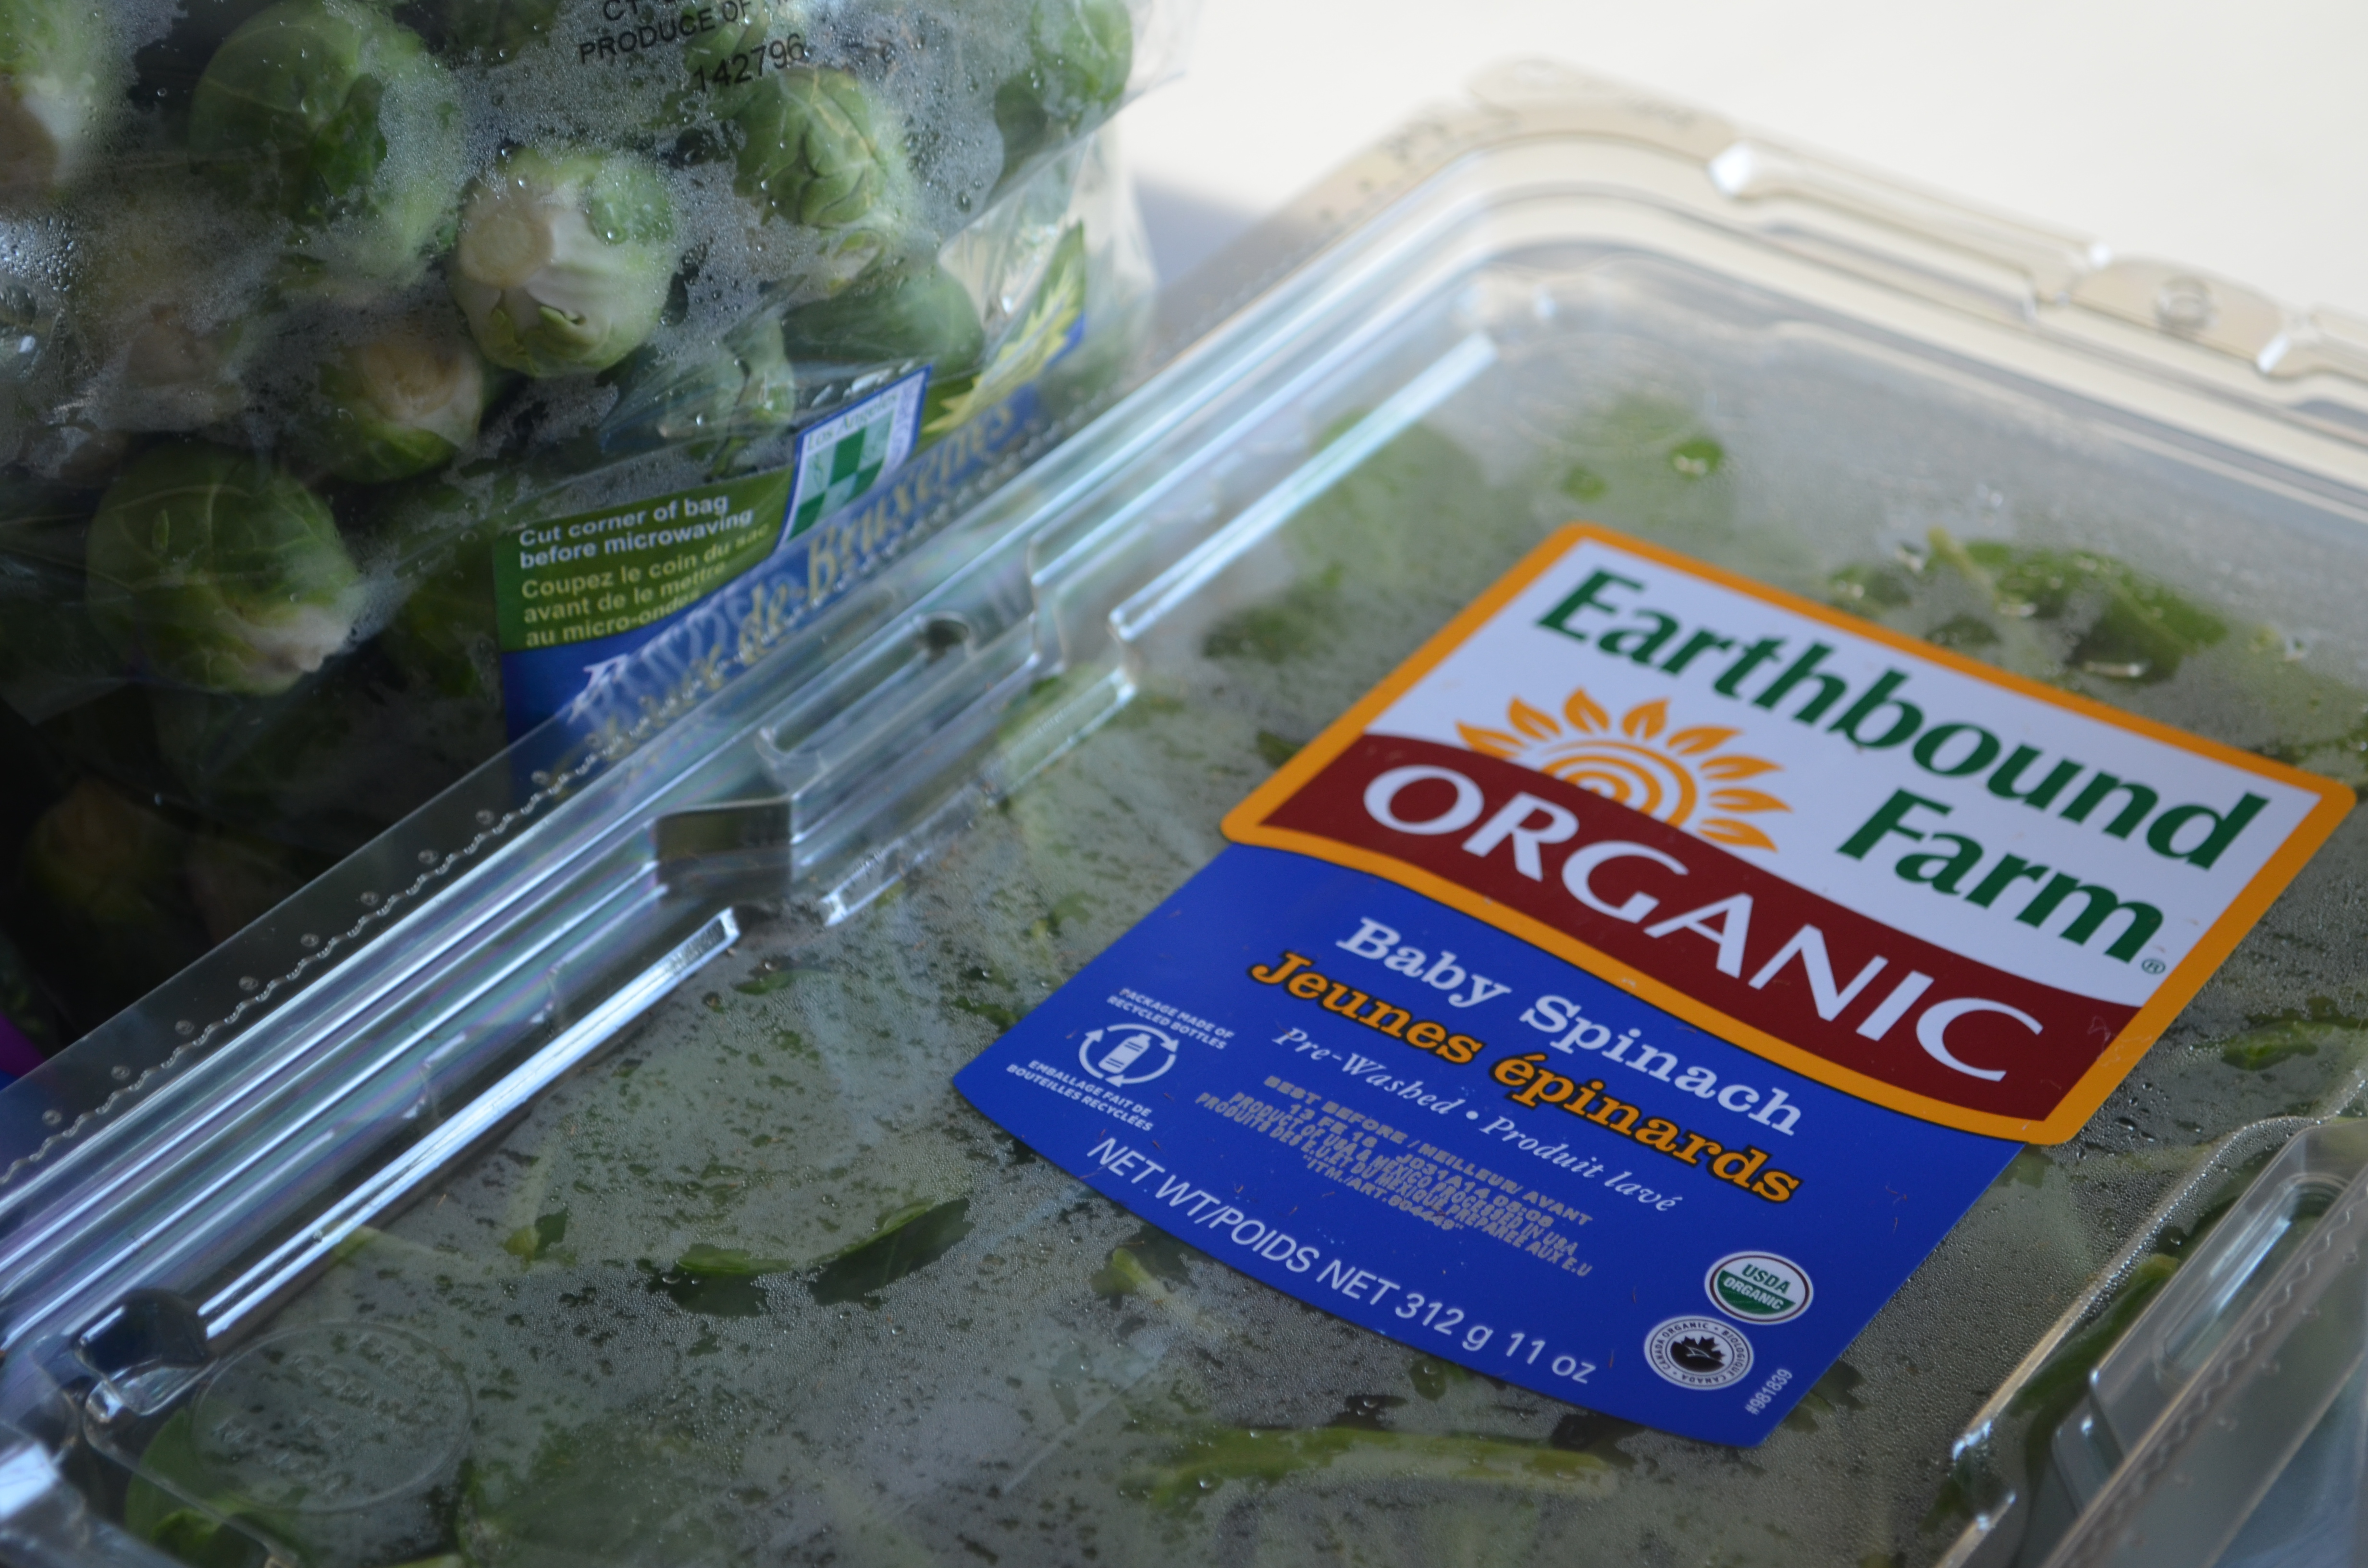 a healthy costco cart: what to buy? | pictures of my (mostly) organic, gluten-free grocery load